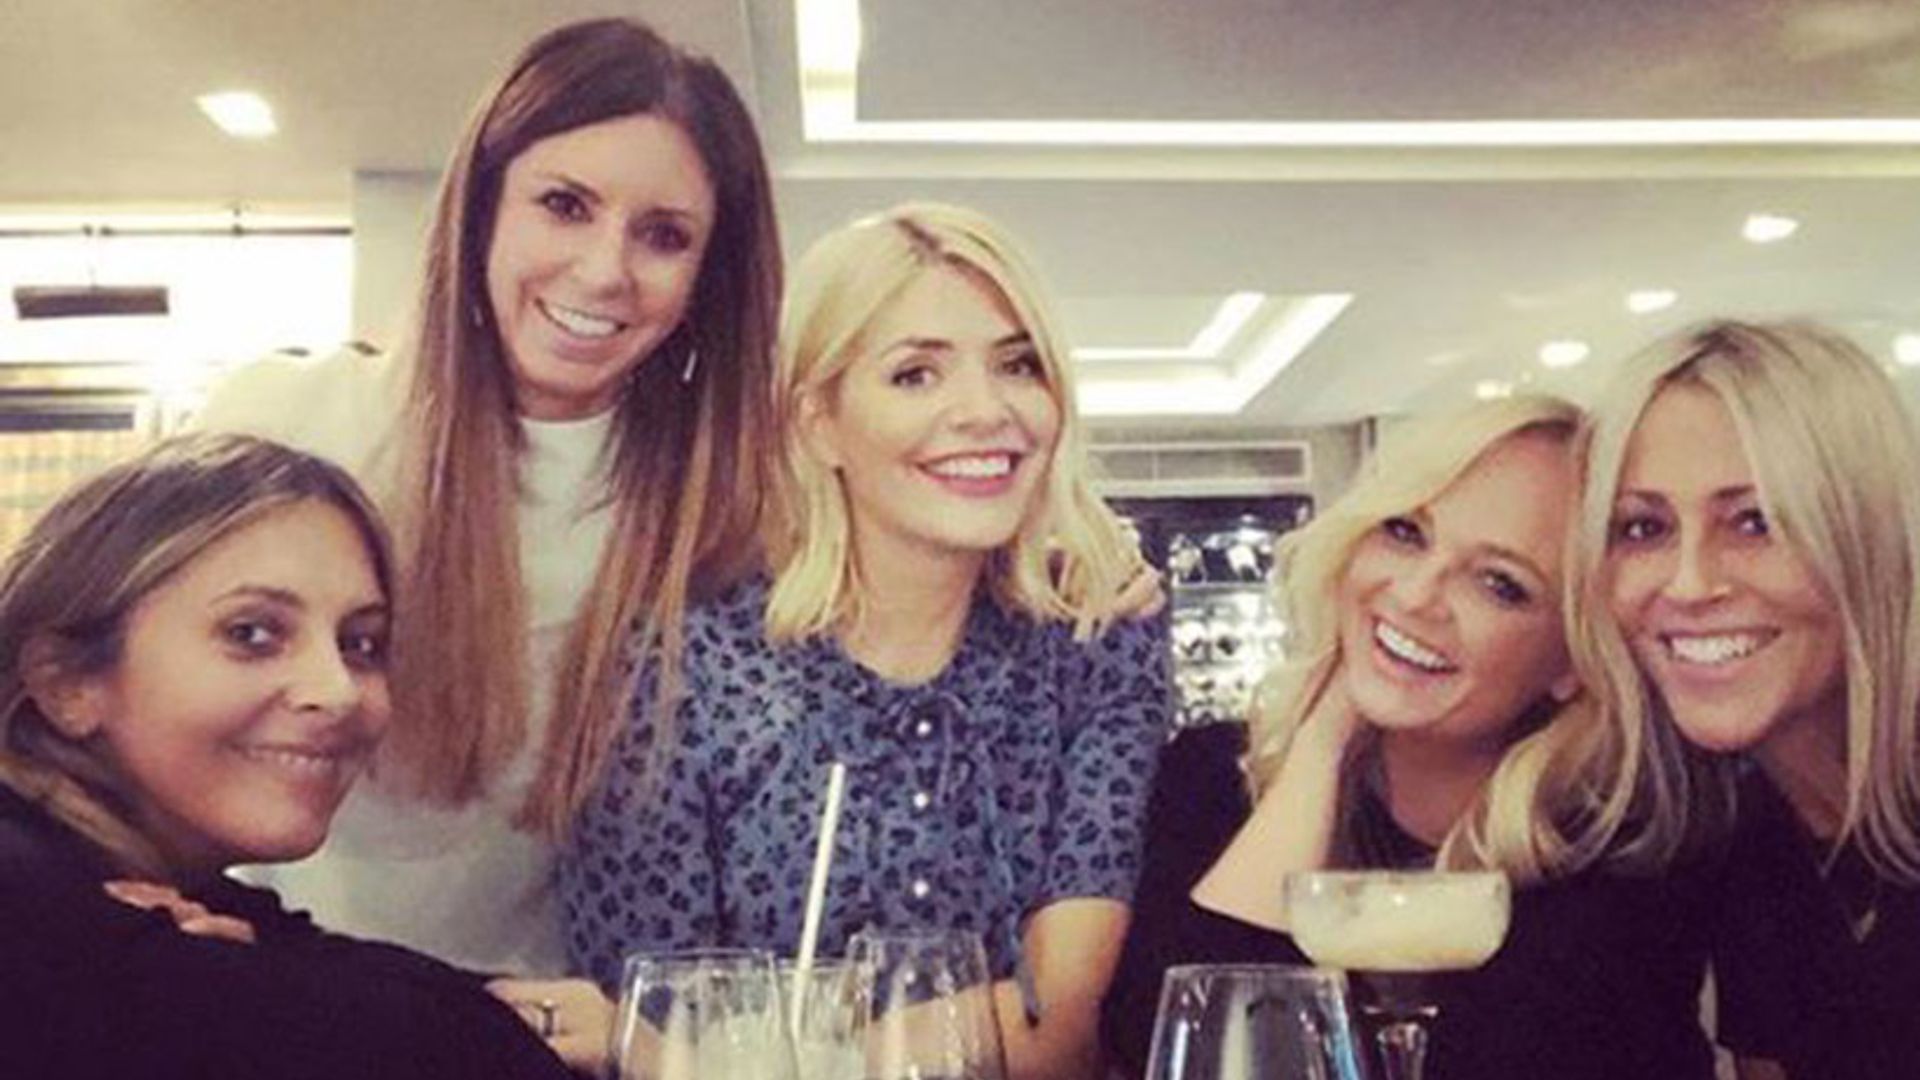 Holly Willoughby enjoys girly night out with Emma Bunton and Nicole Appleton - see pictures